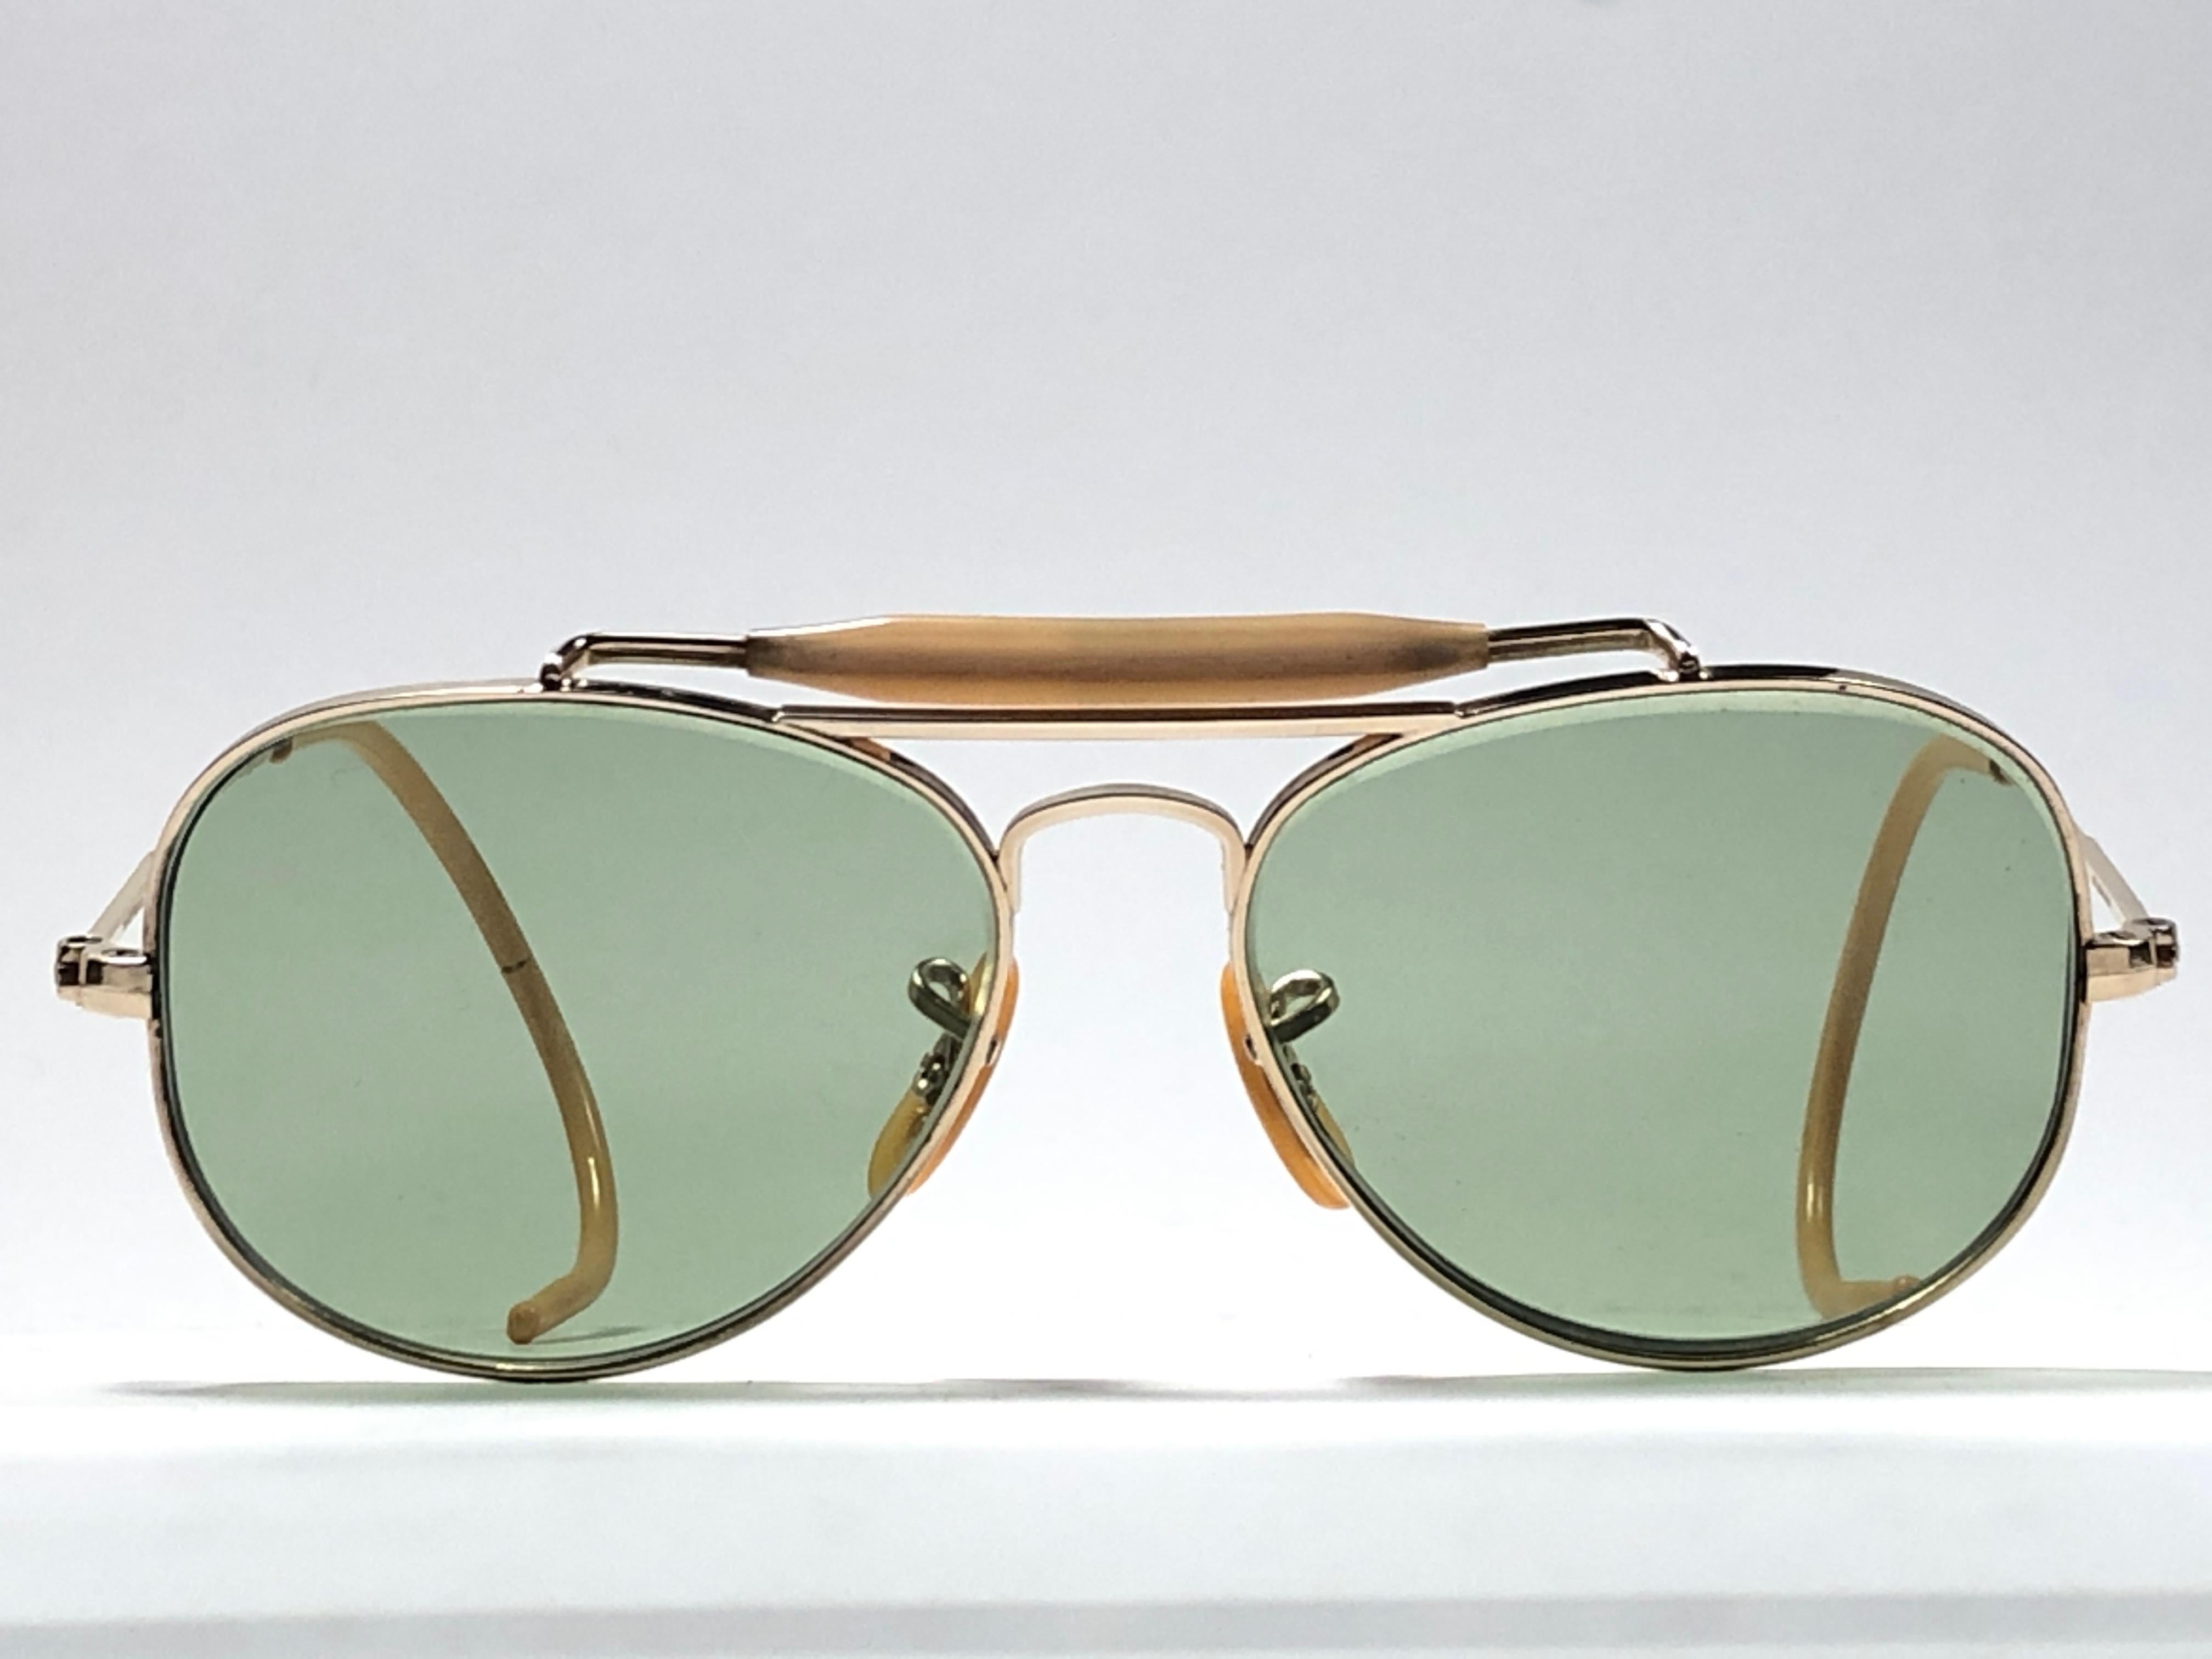 New Super special 1940's vintage Ray Ban Oudoorsmas Aviator 12K gold filled frame with light green lenses.
The smallest size available, suitable for children.  
This piece is a seldom piece. A real piece in sunglasses history.